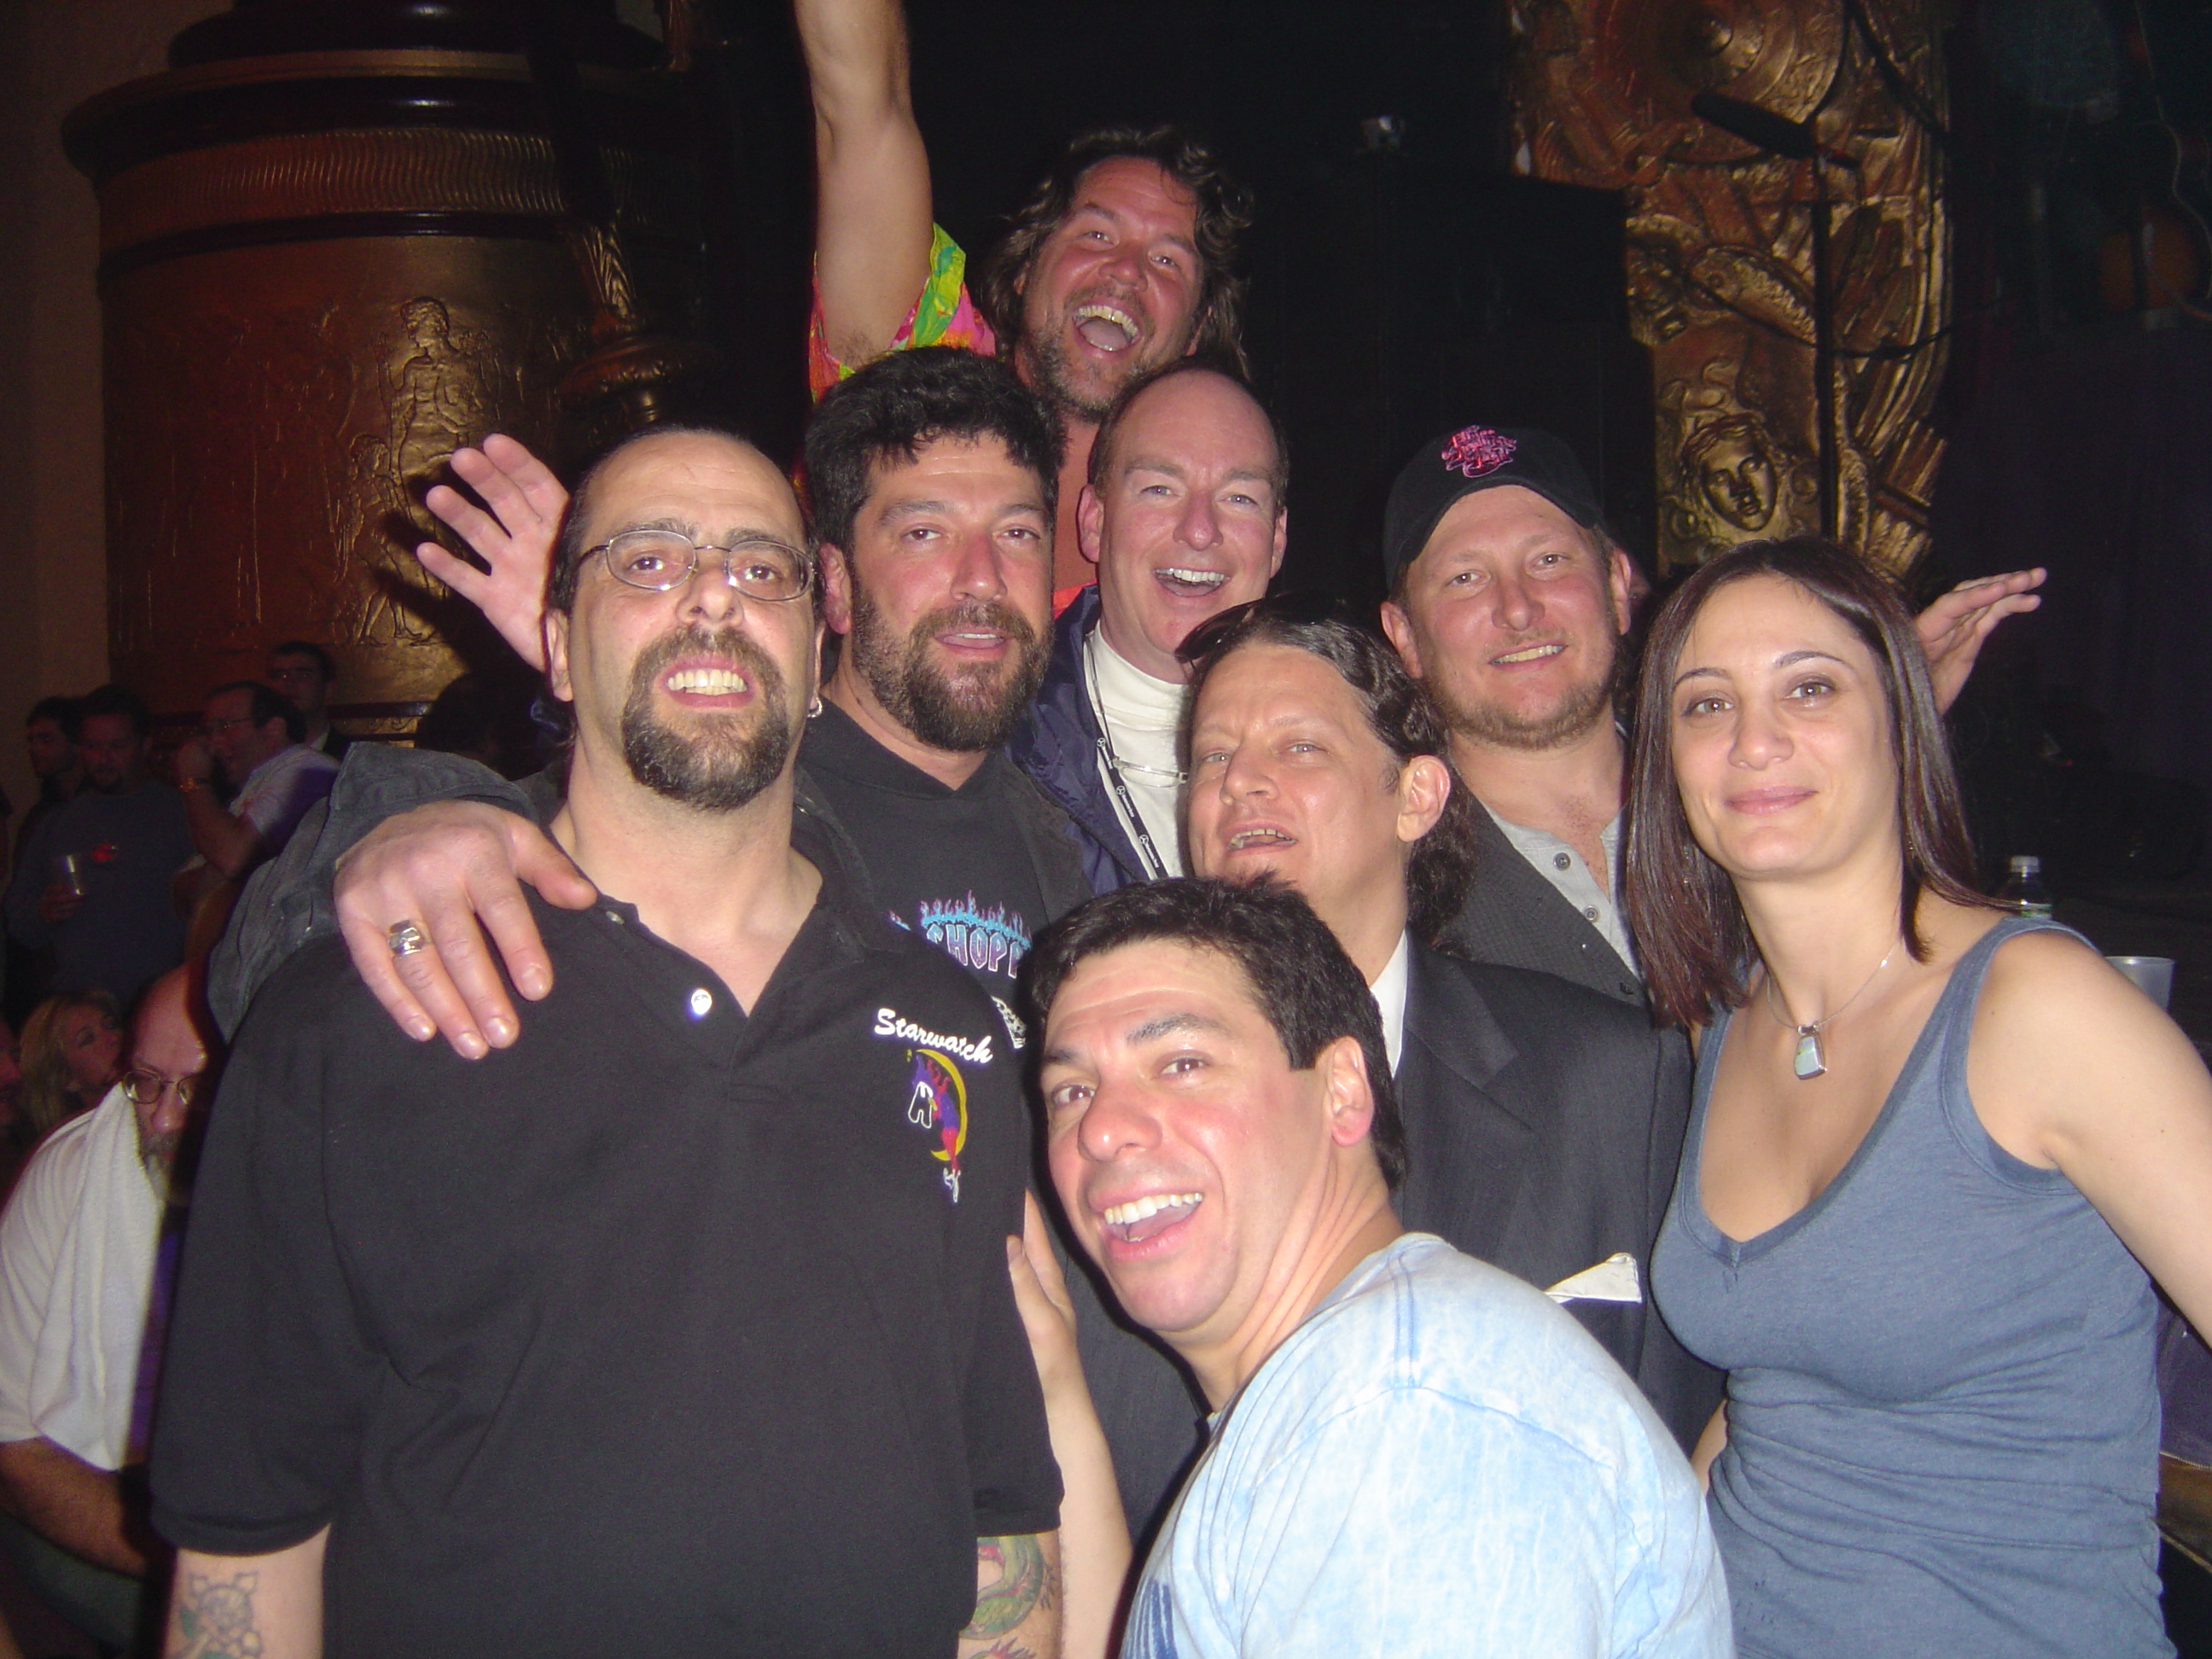 Kevin,Larry,Dave,Bob,Jeff,Cindy and Carlos.
Saturday night 3/25/06
in front of 